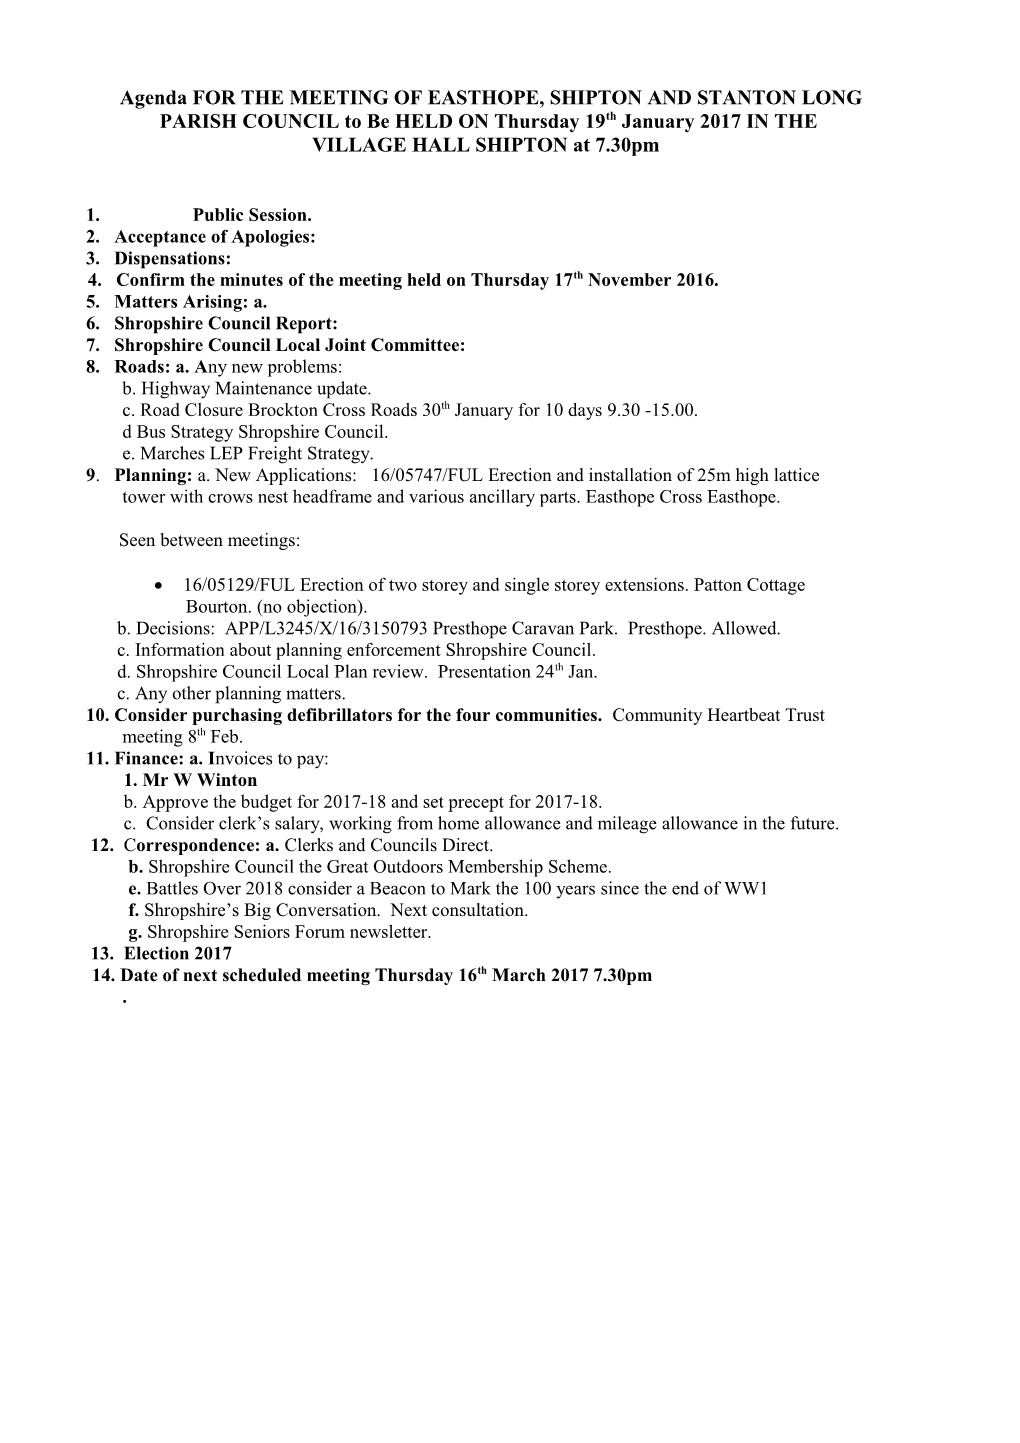 Agenda for the Next Meeting of Easthope, Shipton and Stanton Long Parish Council to Be